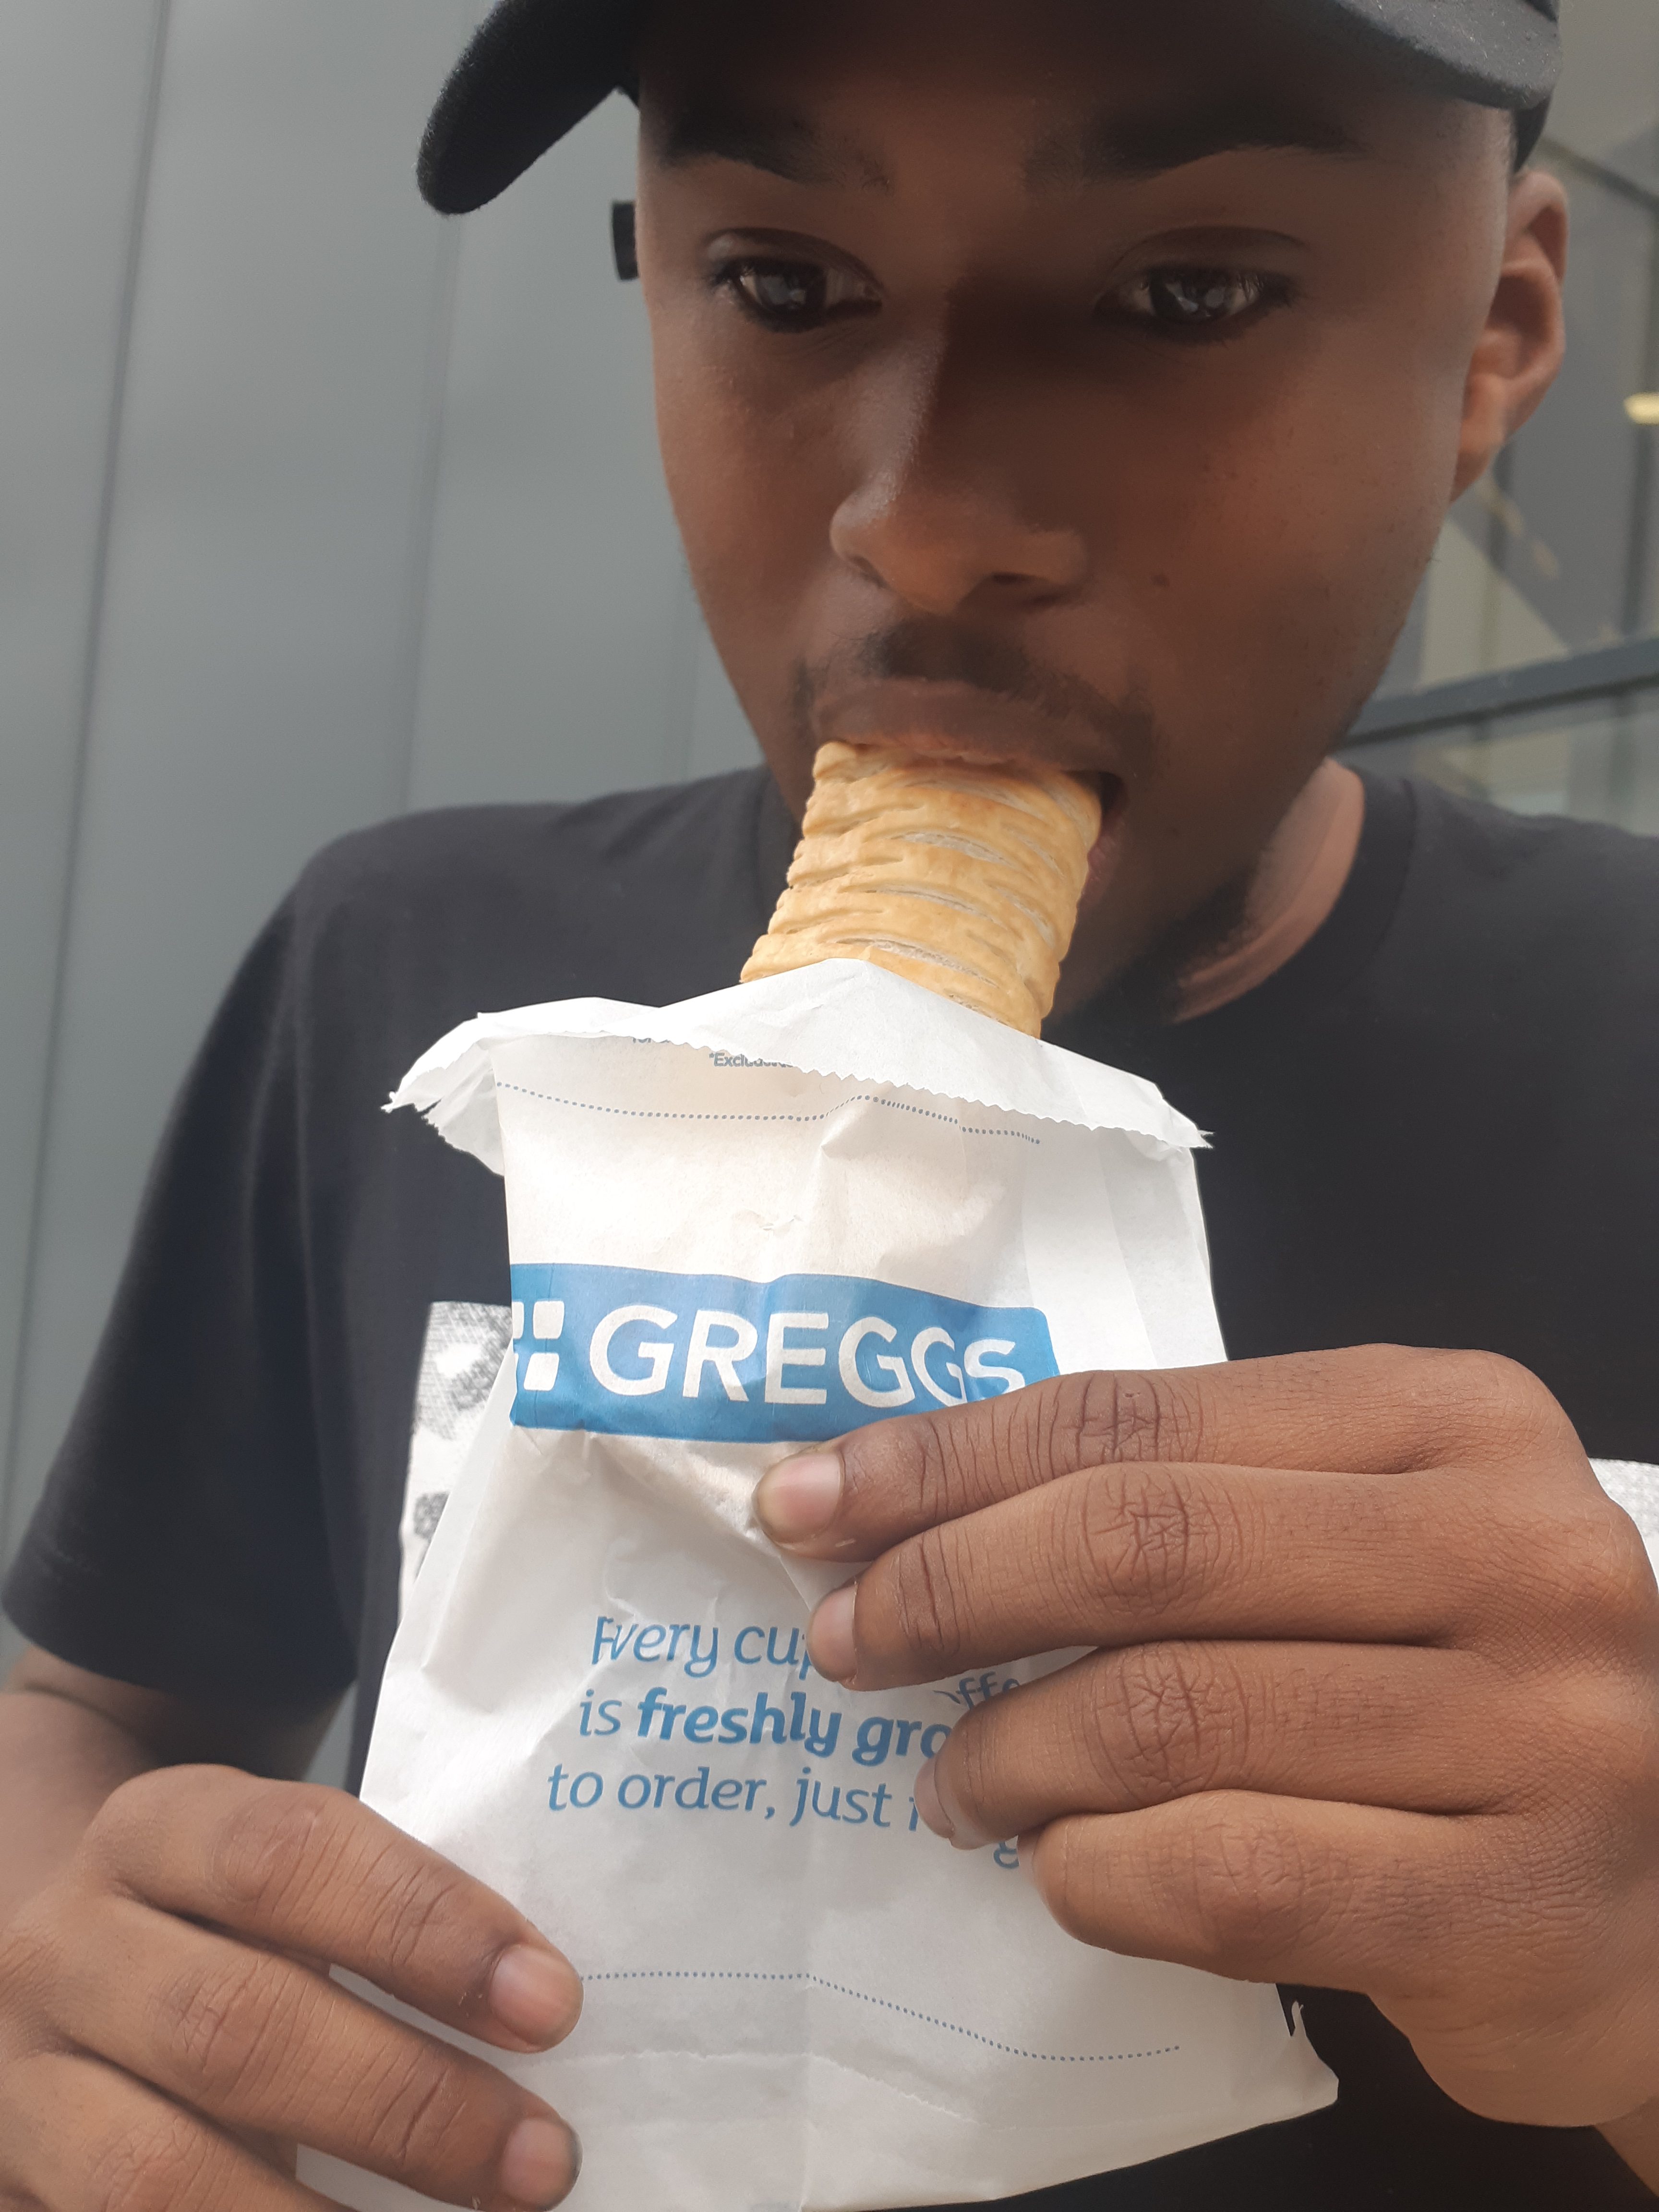 The new Greggs vegan sausage roll which went viral earlier this month.